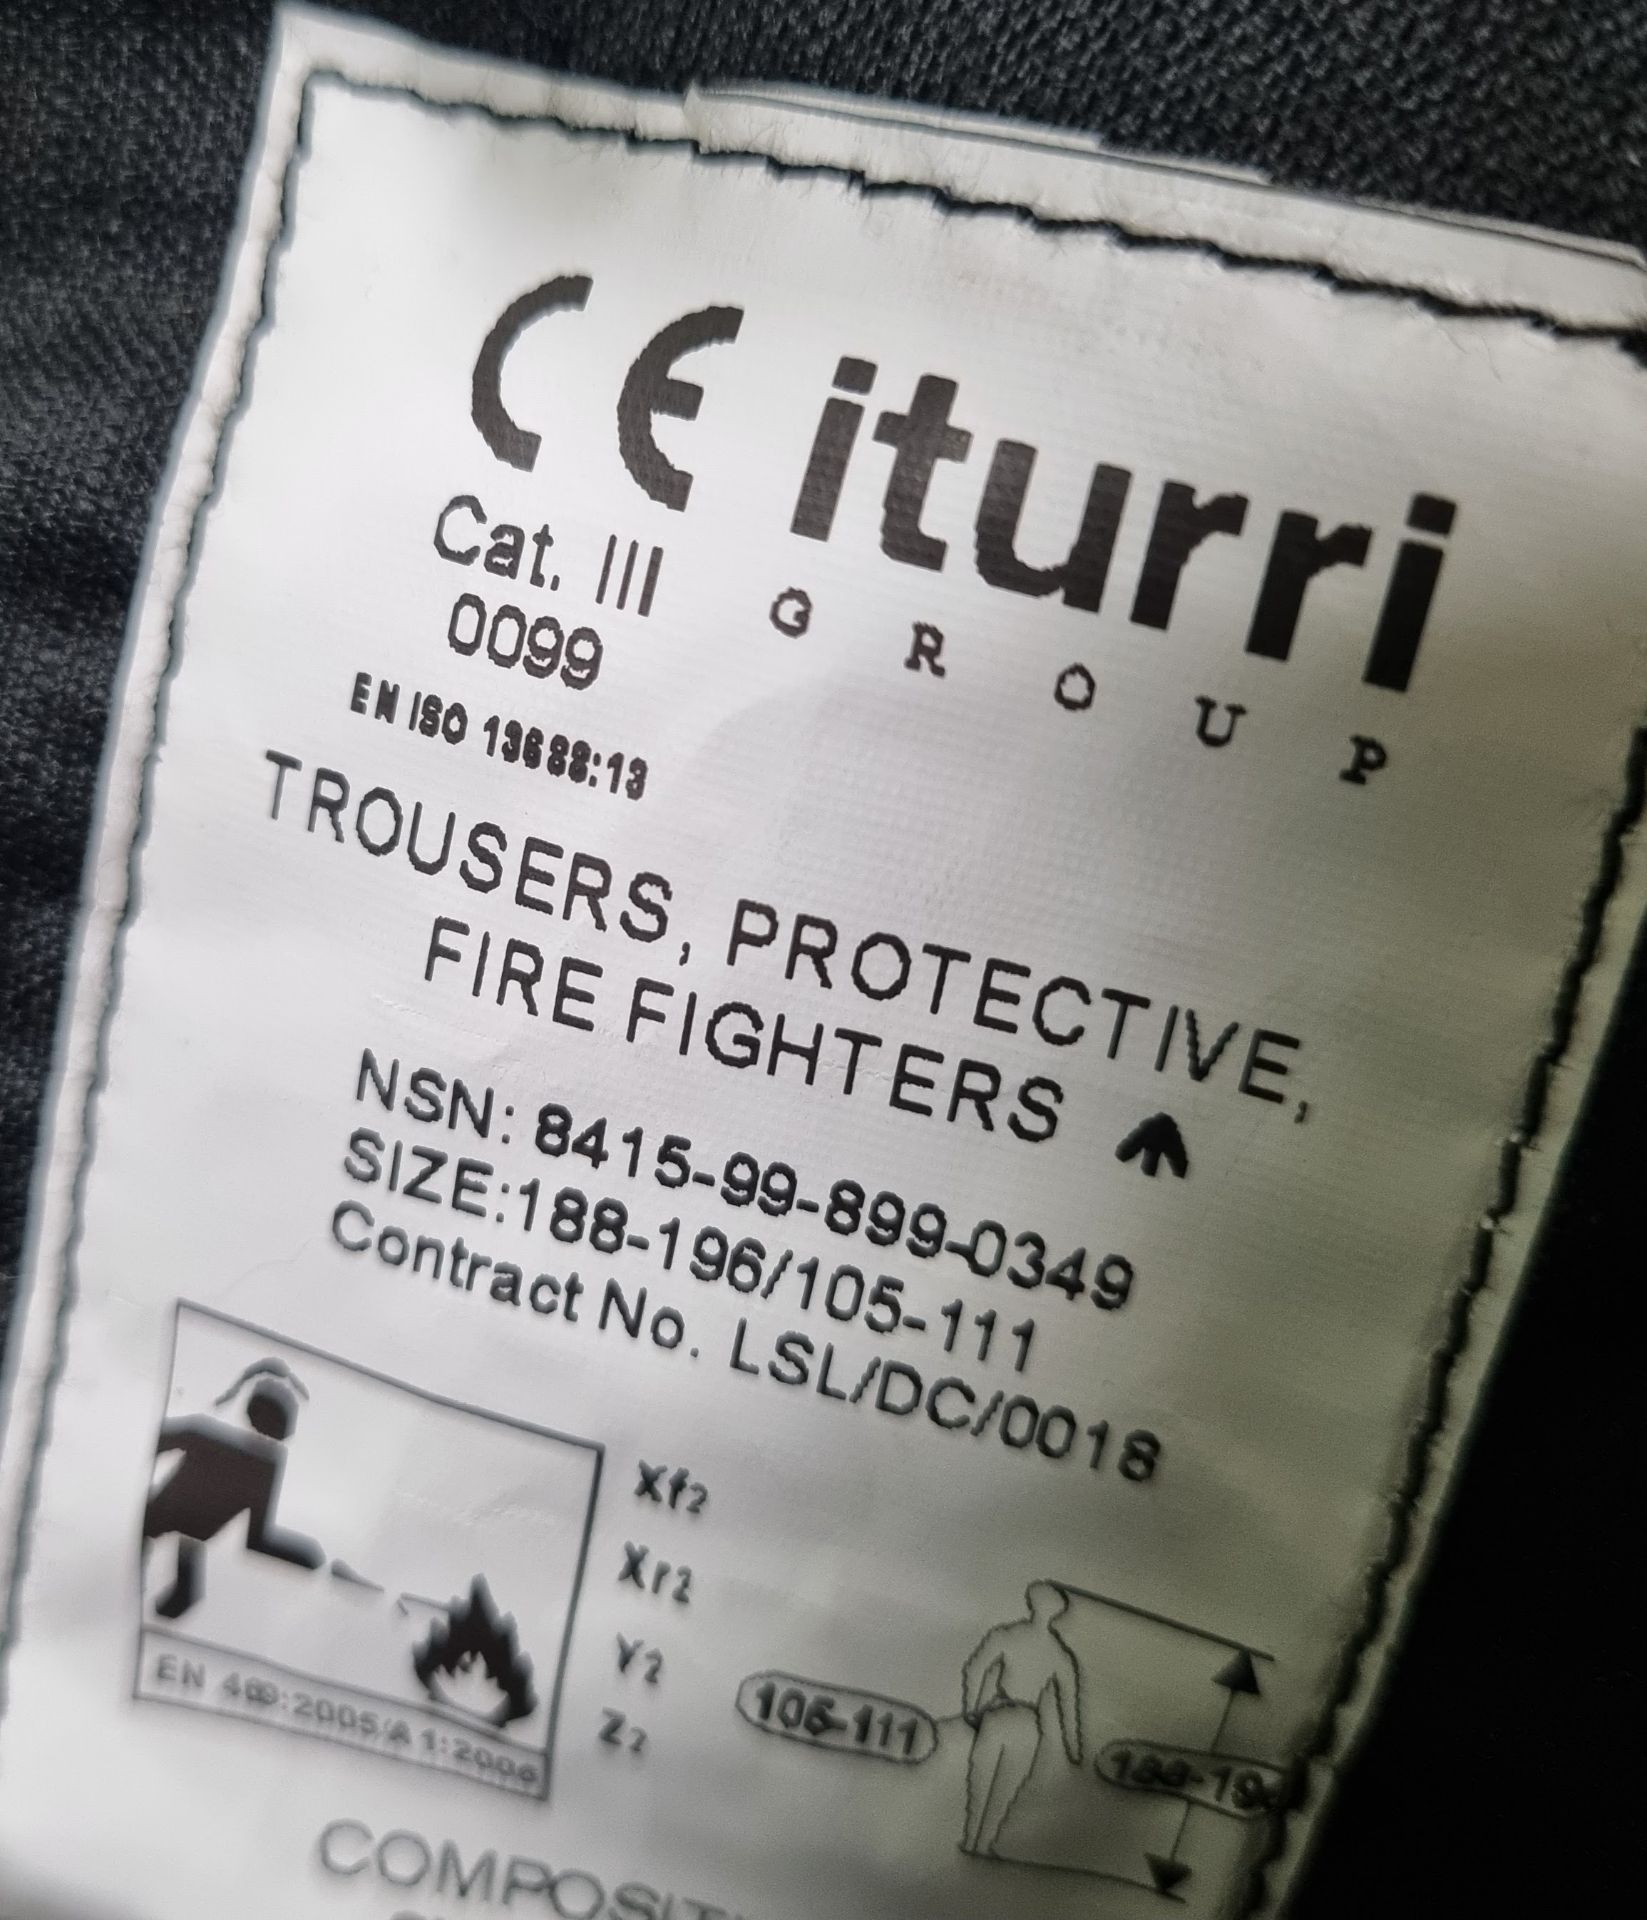 Iturri Firefighter Protective Gore-Tex Trousers - Image 3 of 3